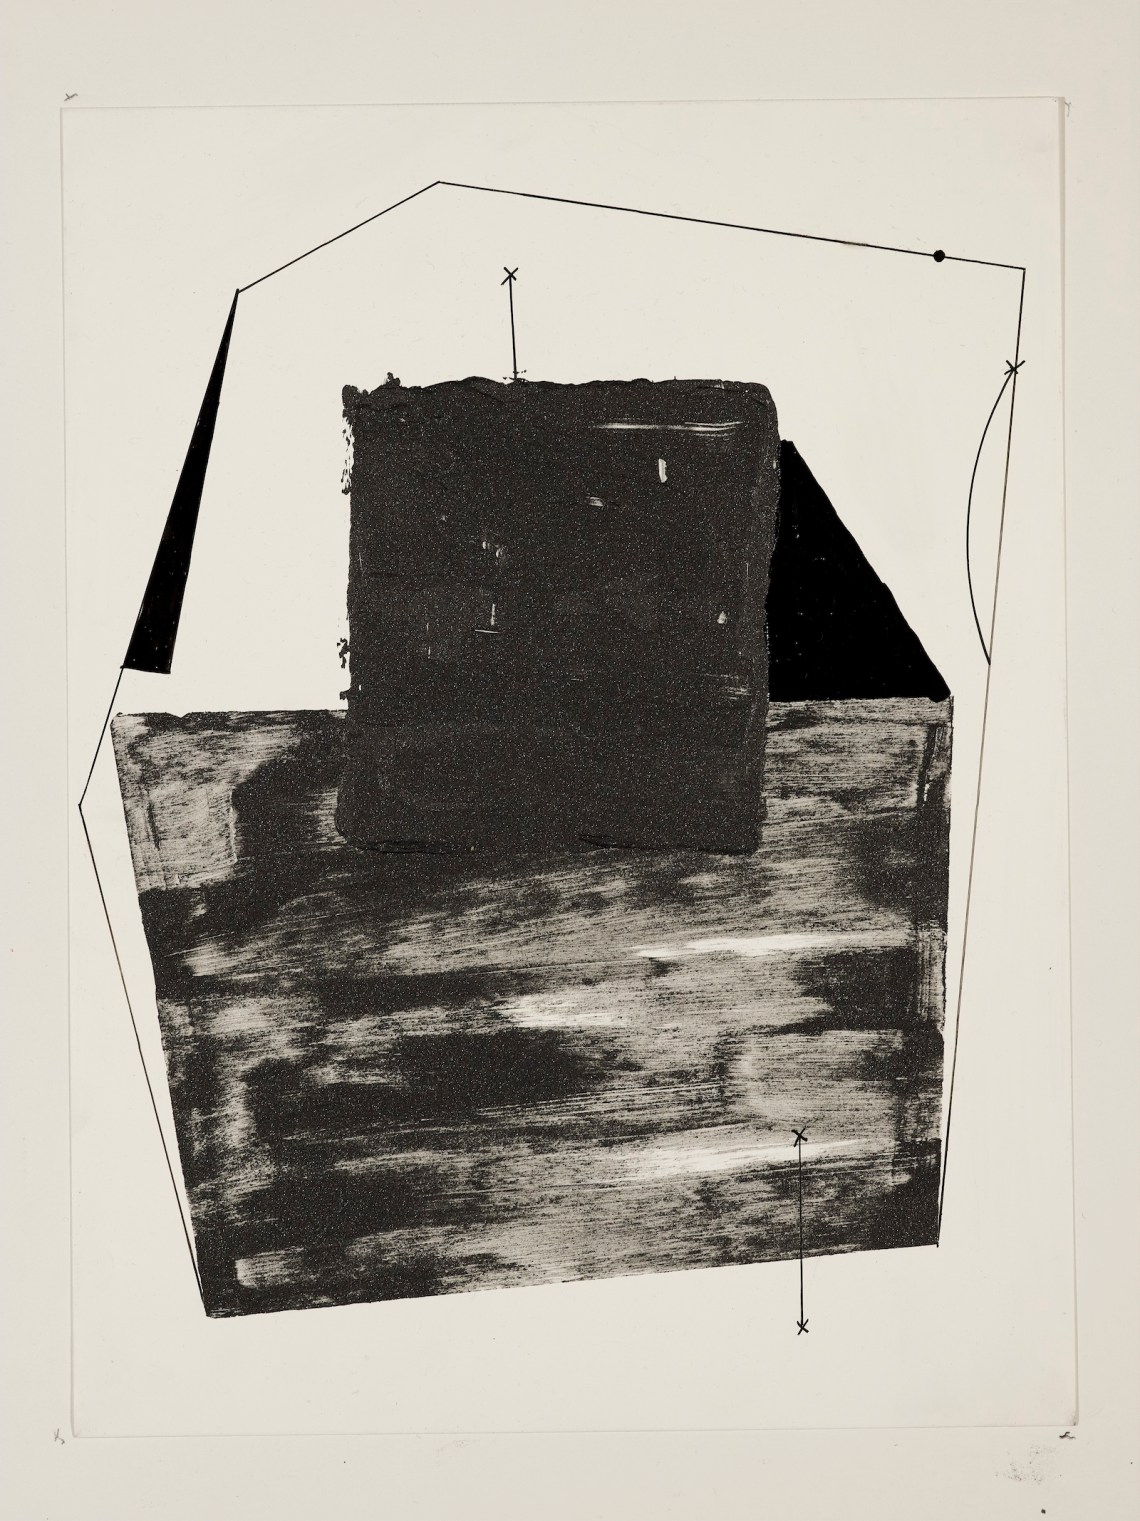 A black-and-white abstract drawing of a square surrounded by geometric forms